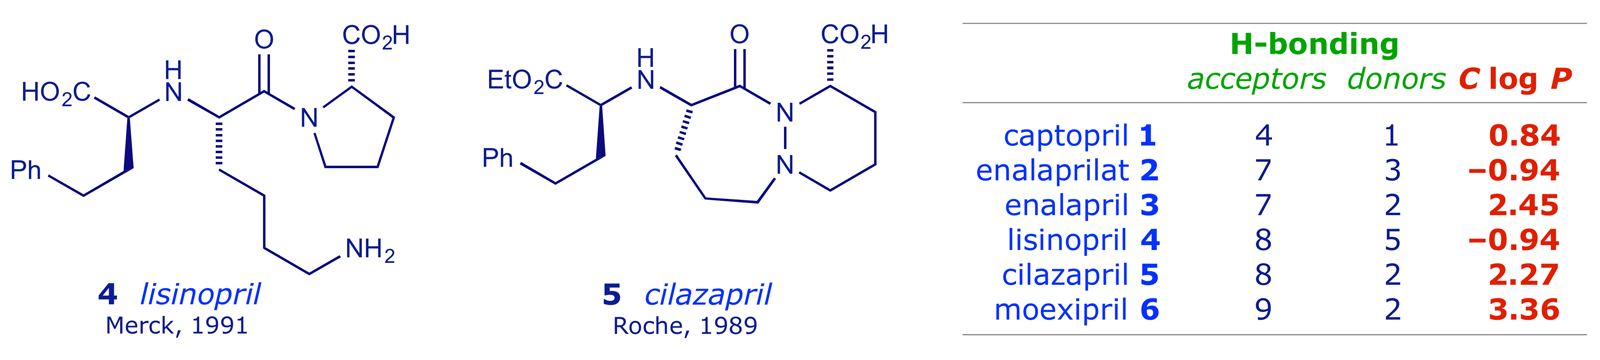 Structures of lisinopril and cilazapril with table showing lipophilicity of various ACE inhibitors